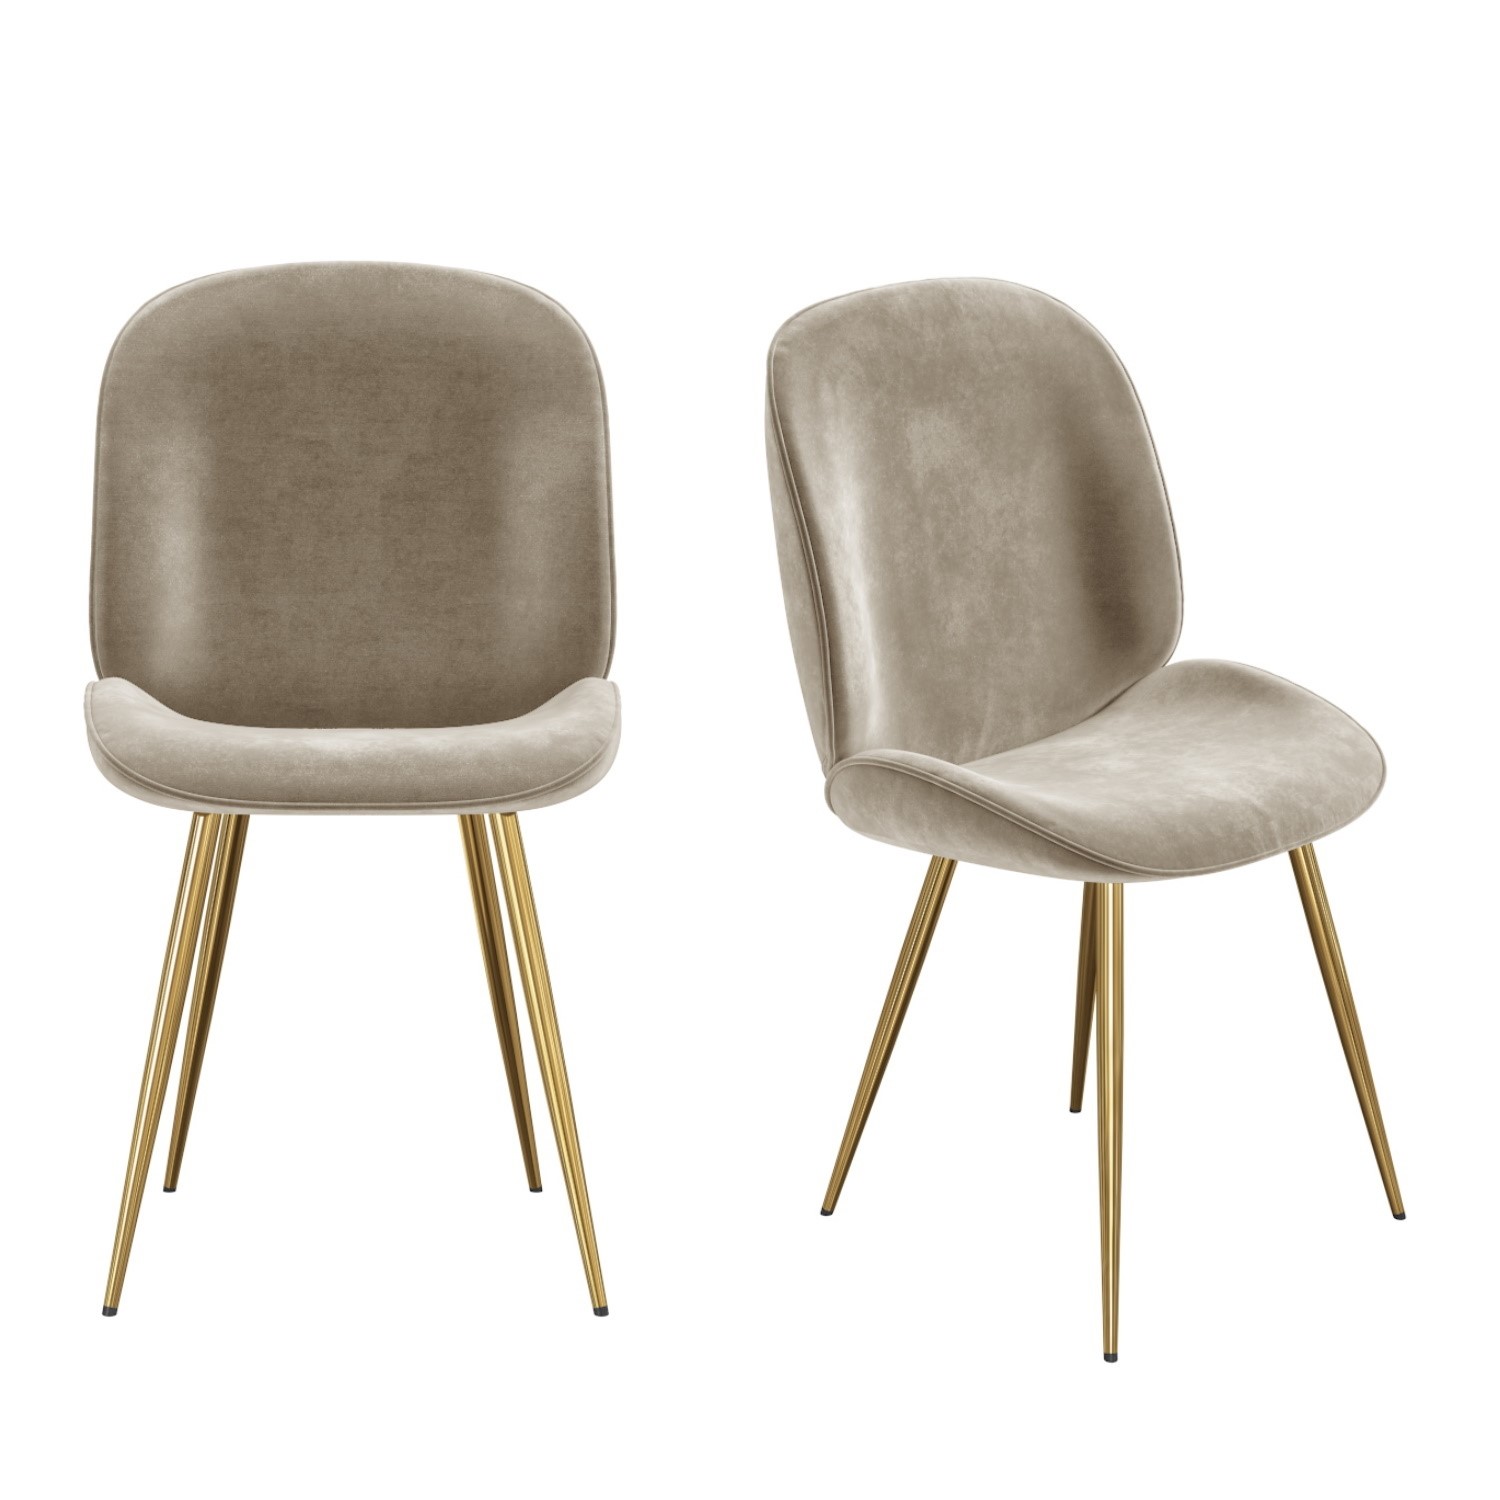 Photo of Set of 2 mink velvet dining chairs with gold legs- jenna